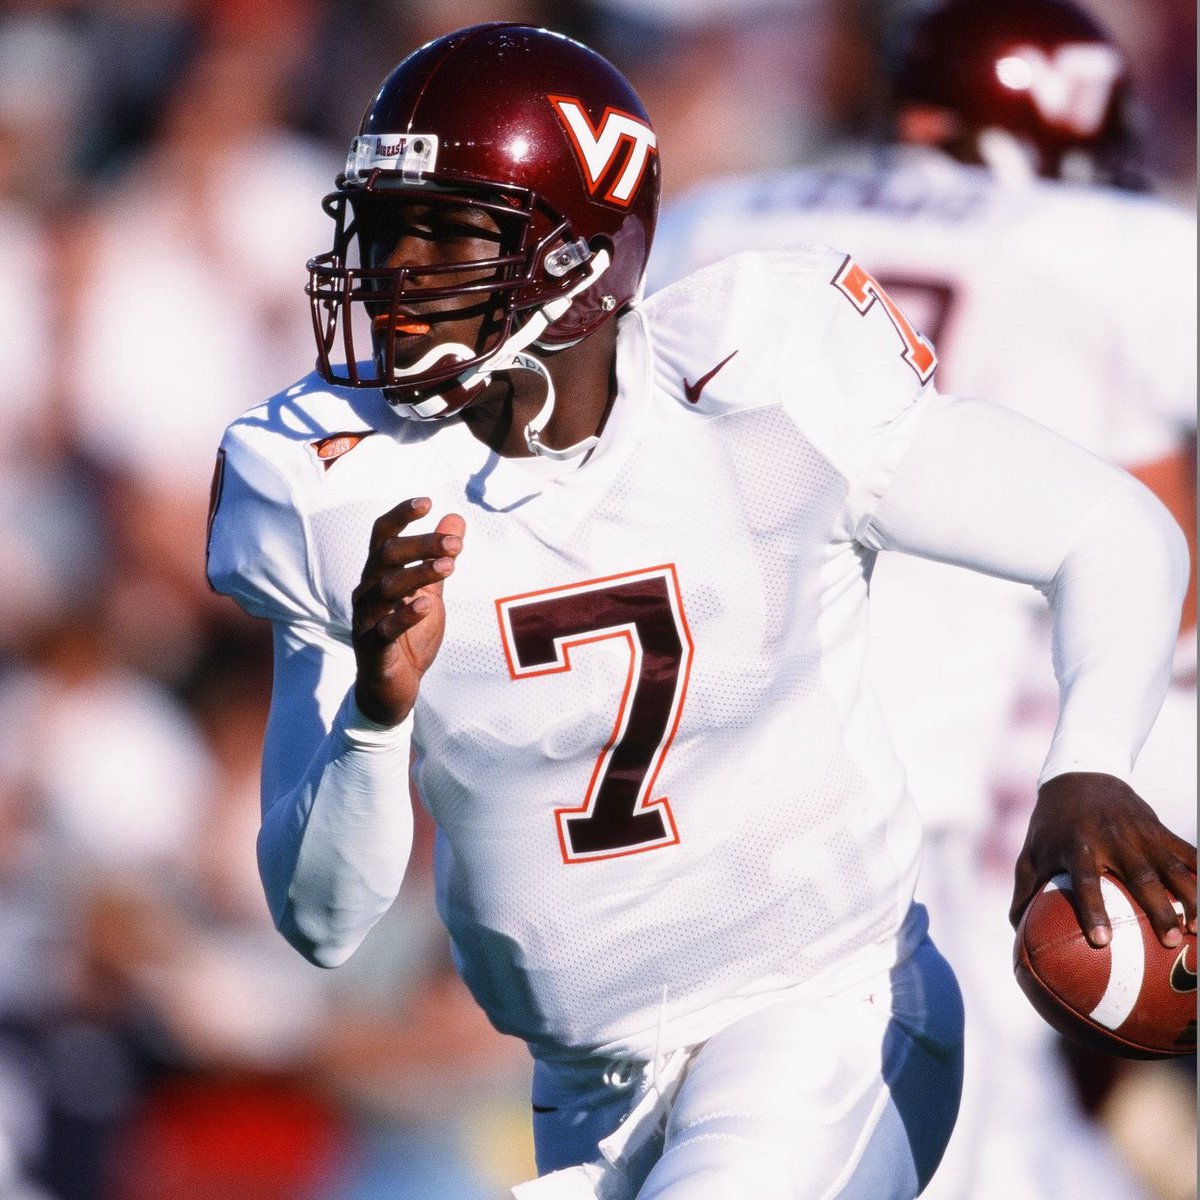 .@HokiesFB is set to unveil new uniforms inspired by the Mike Vick era uniforms. #uniswag